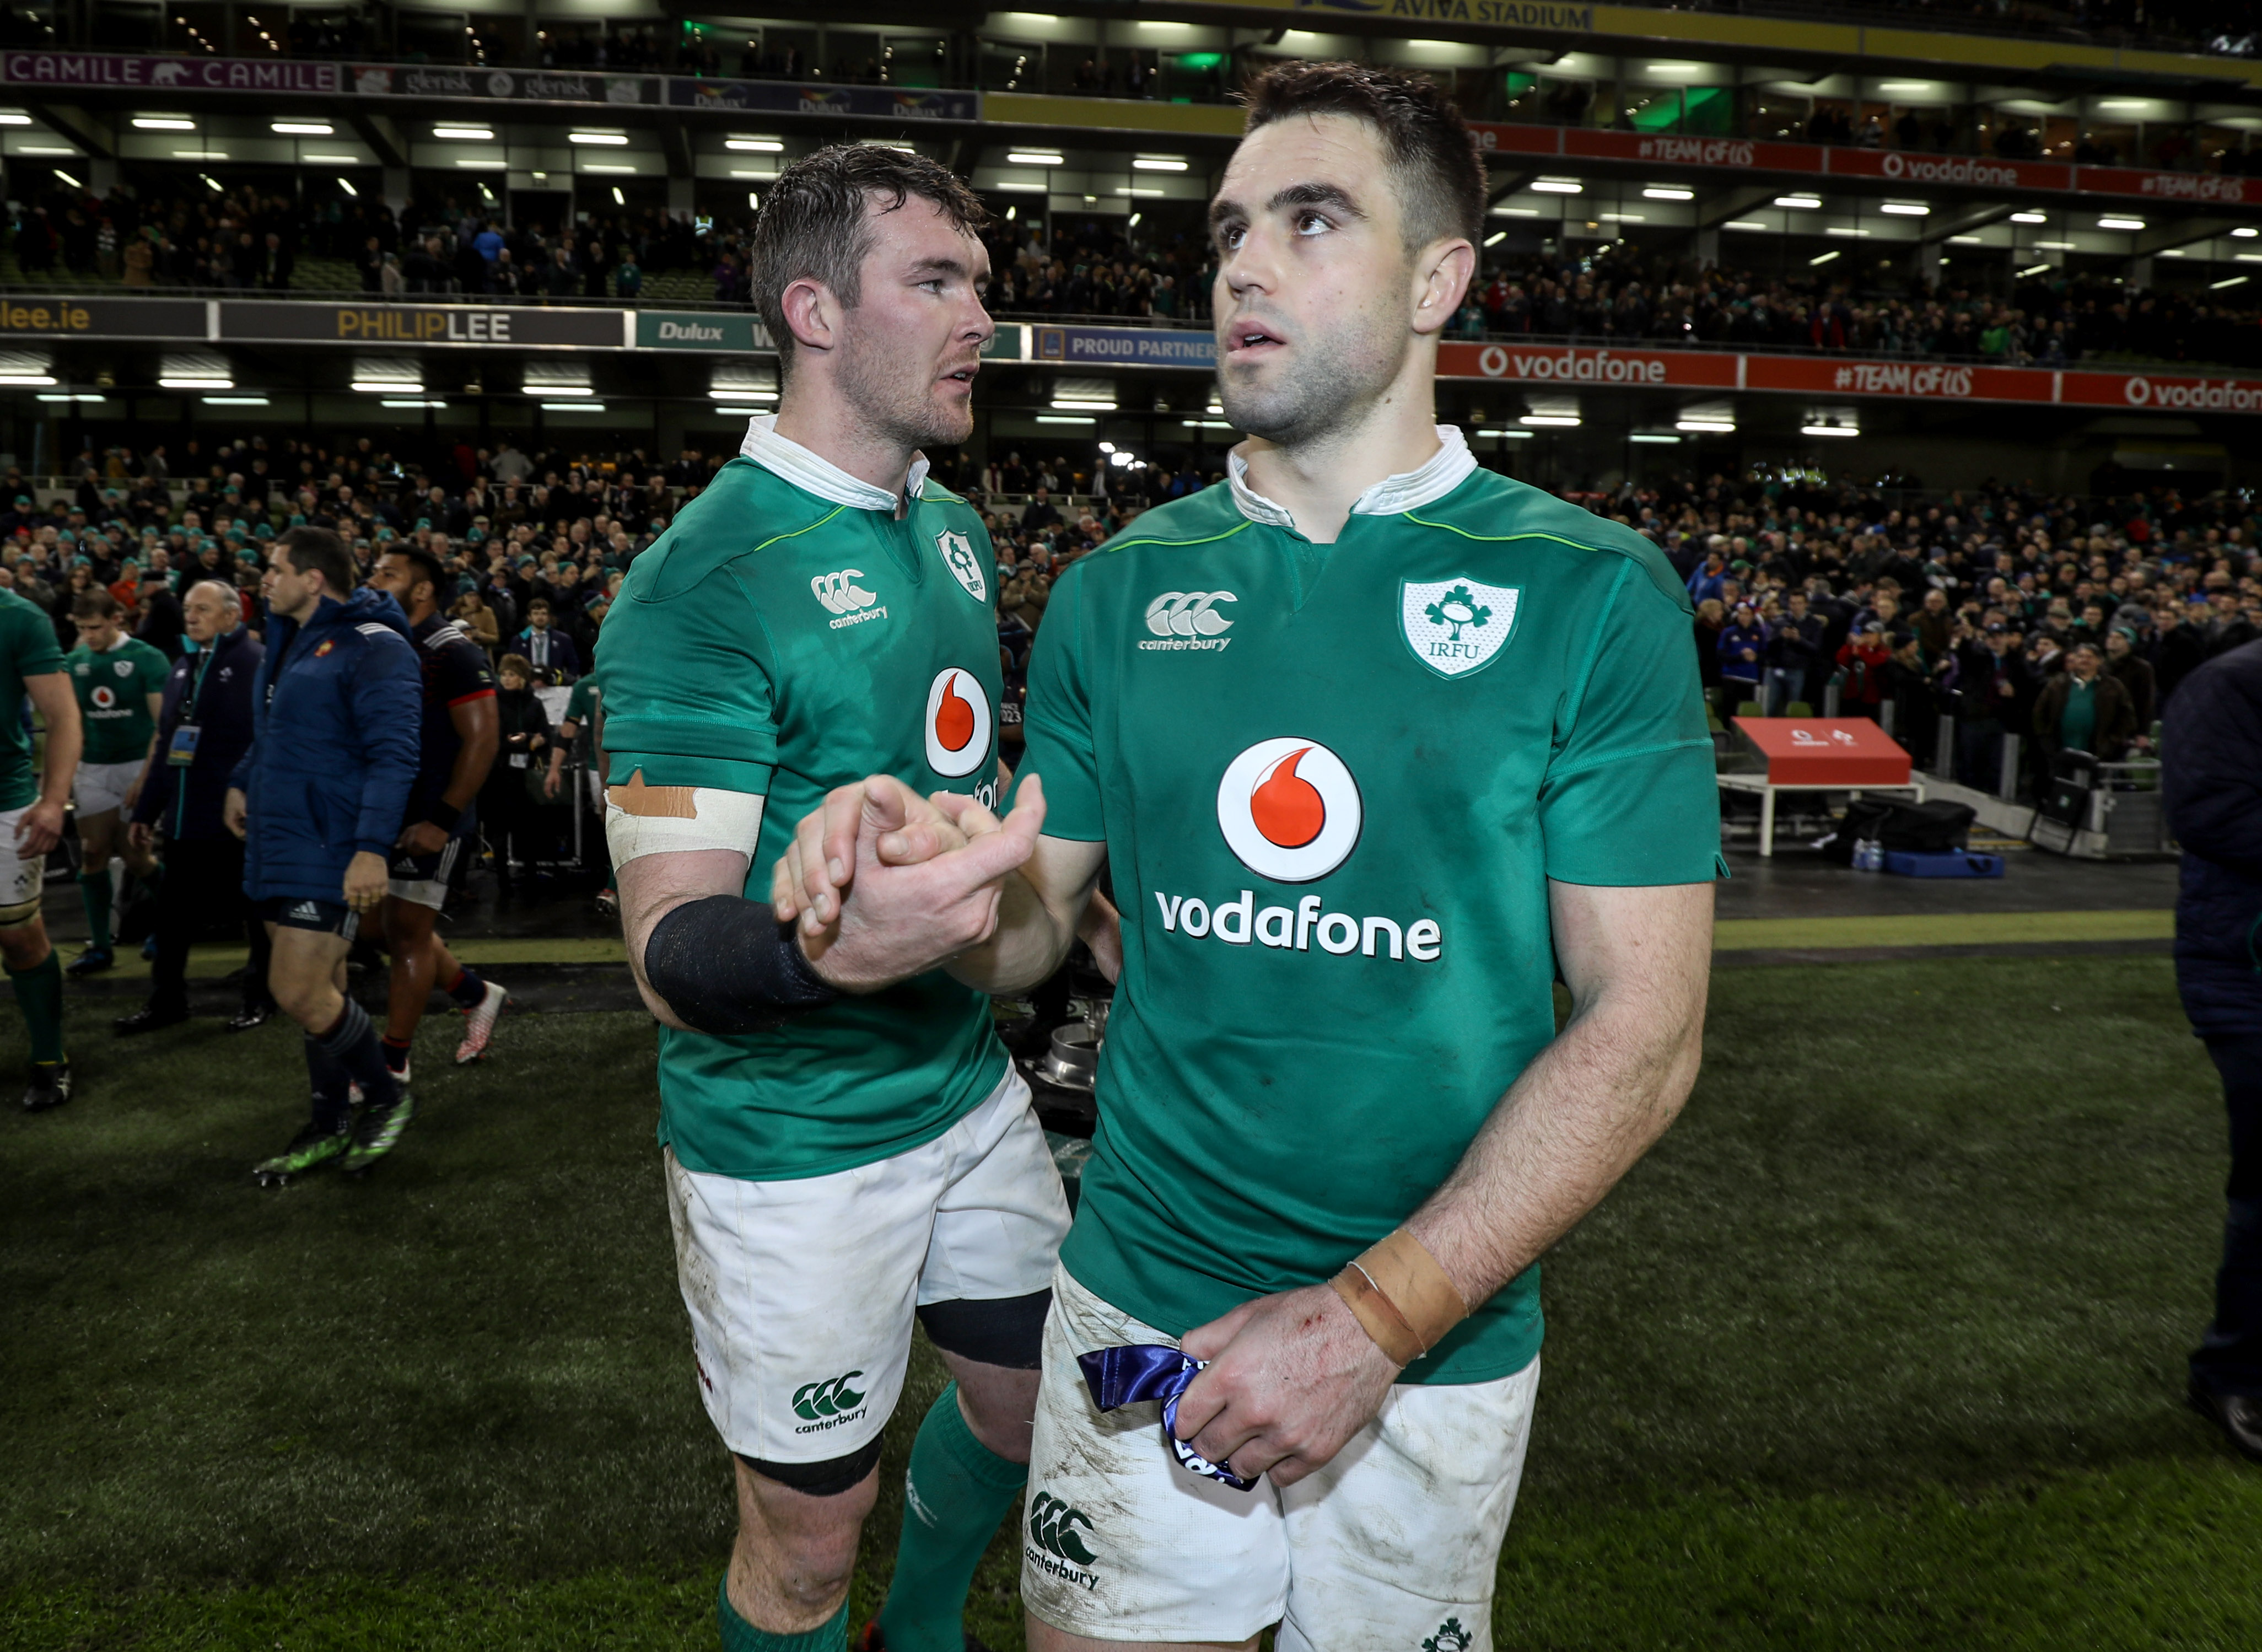 Conor Murray and Peter O'Mahony celebrate winning 25/2/2017